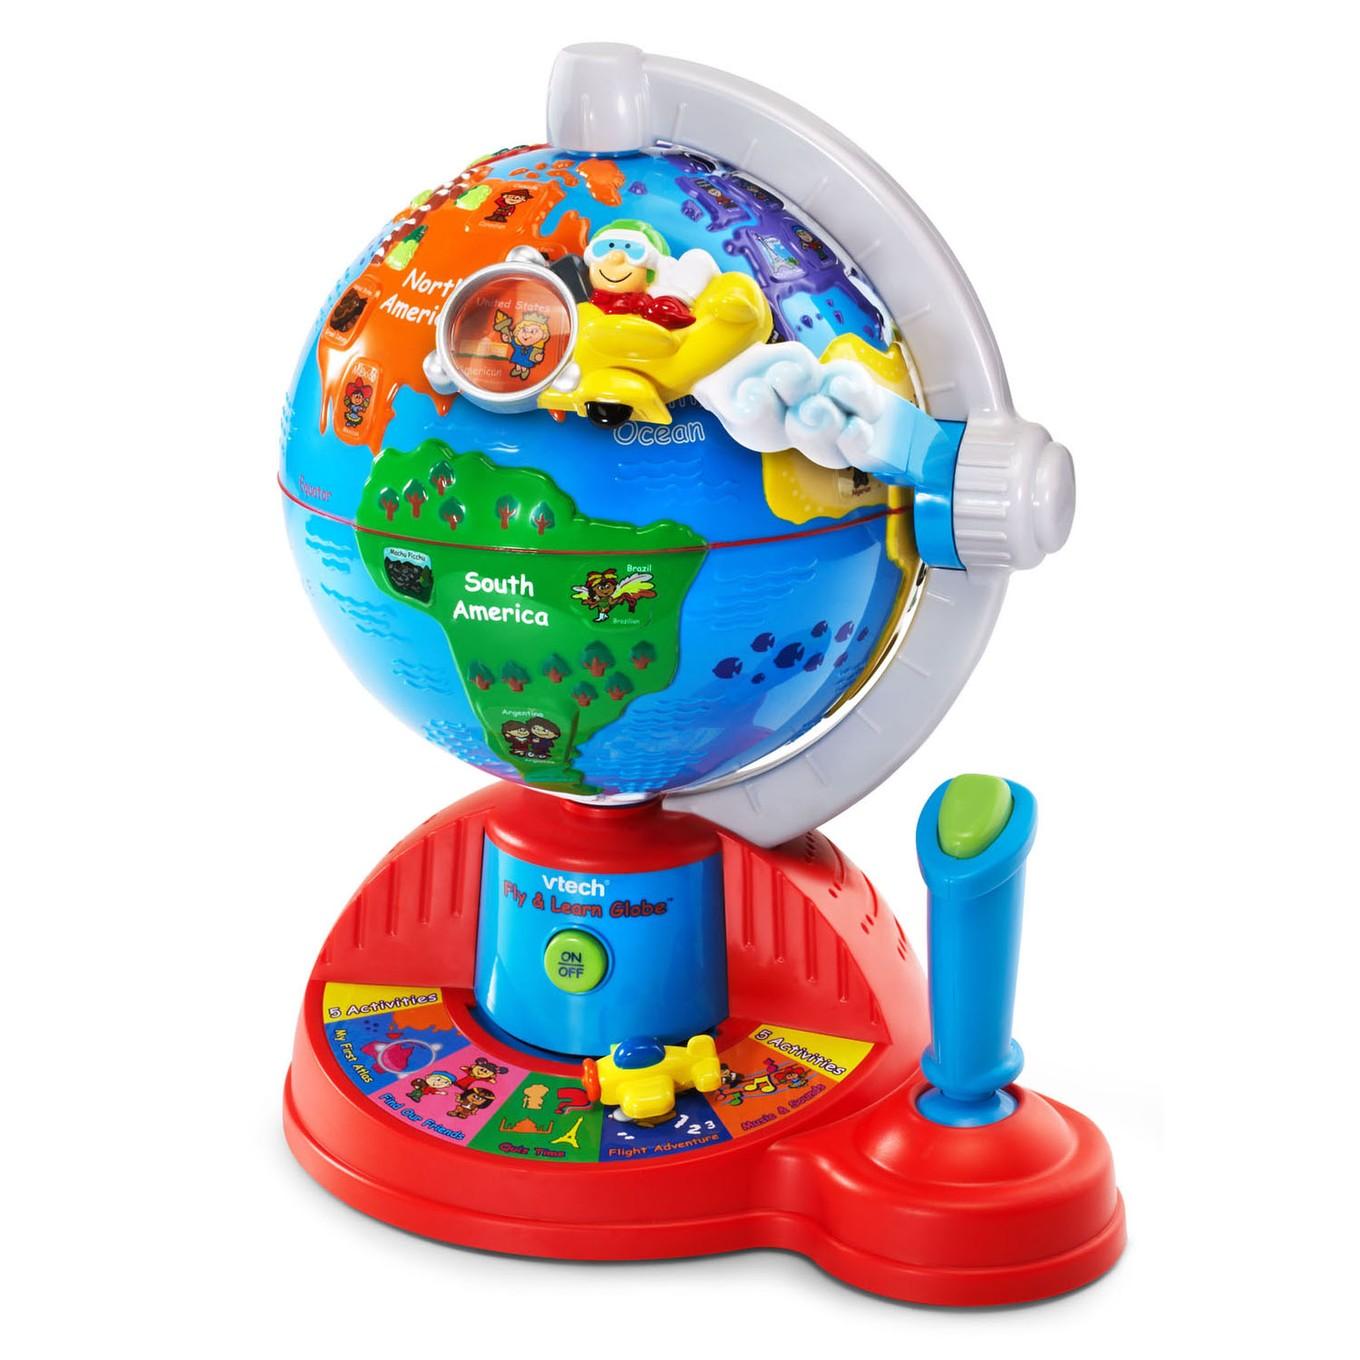 Vtech - Lumi interactive globe - 3 to 6 years old